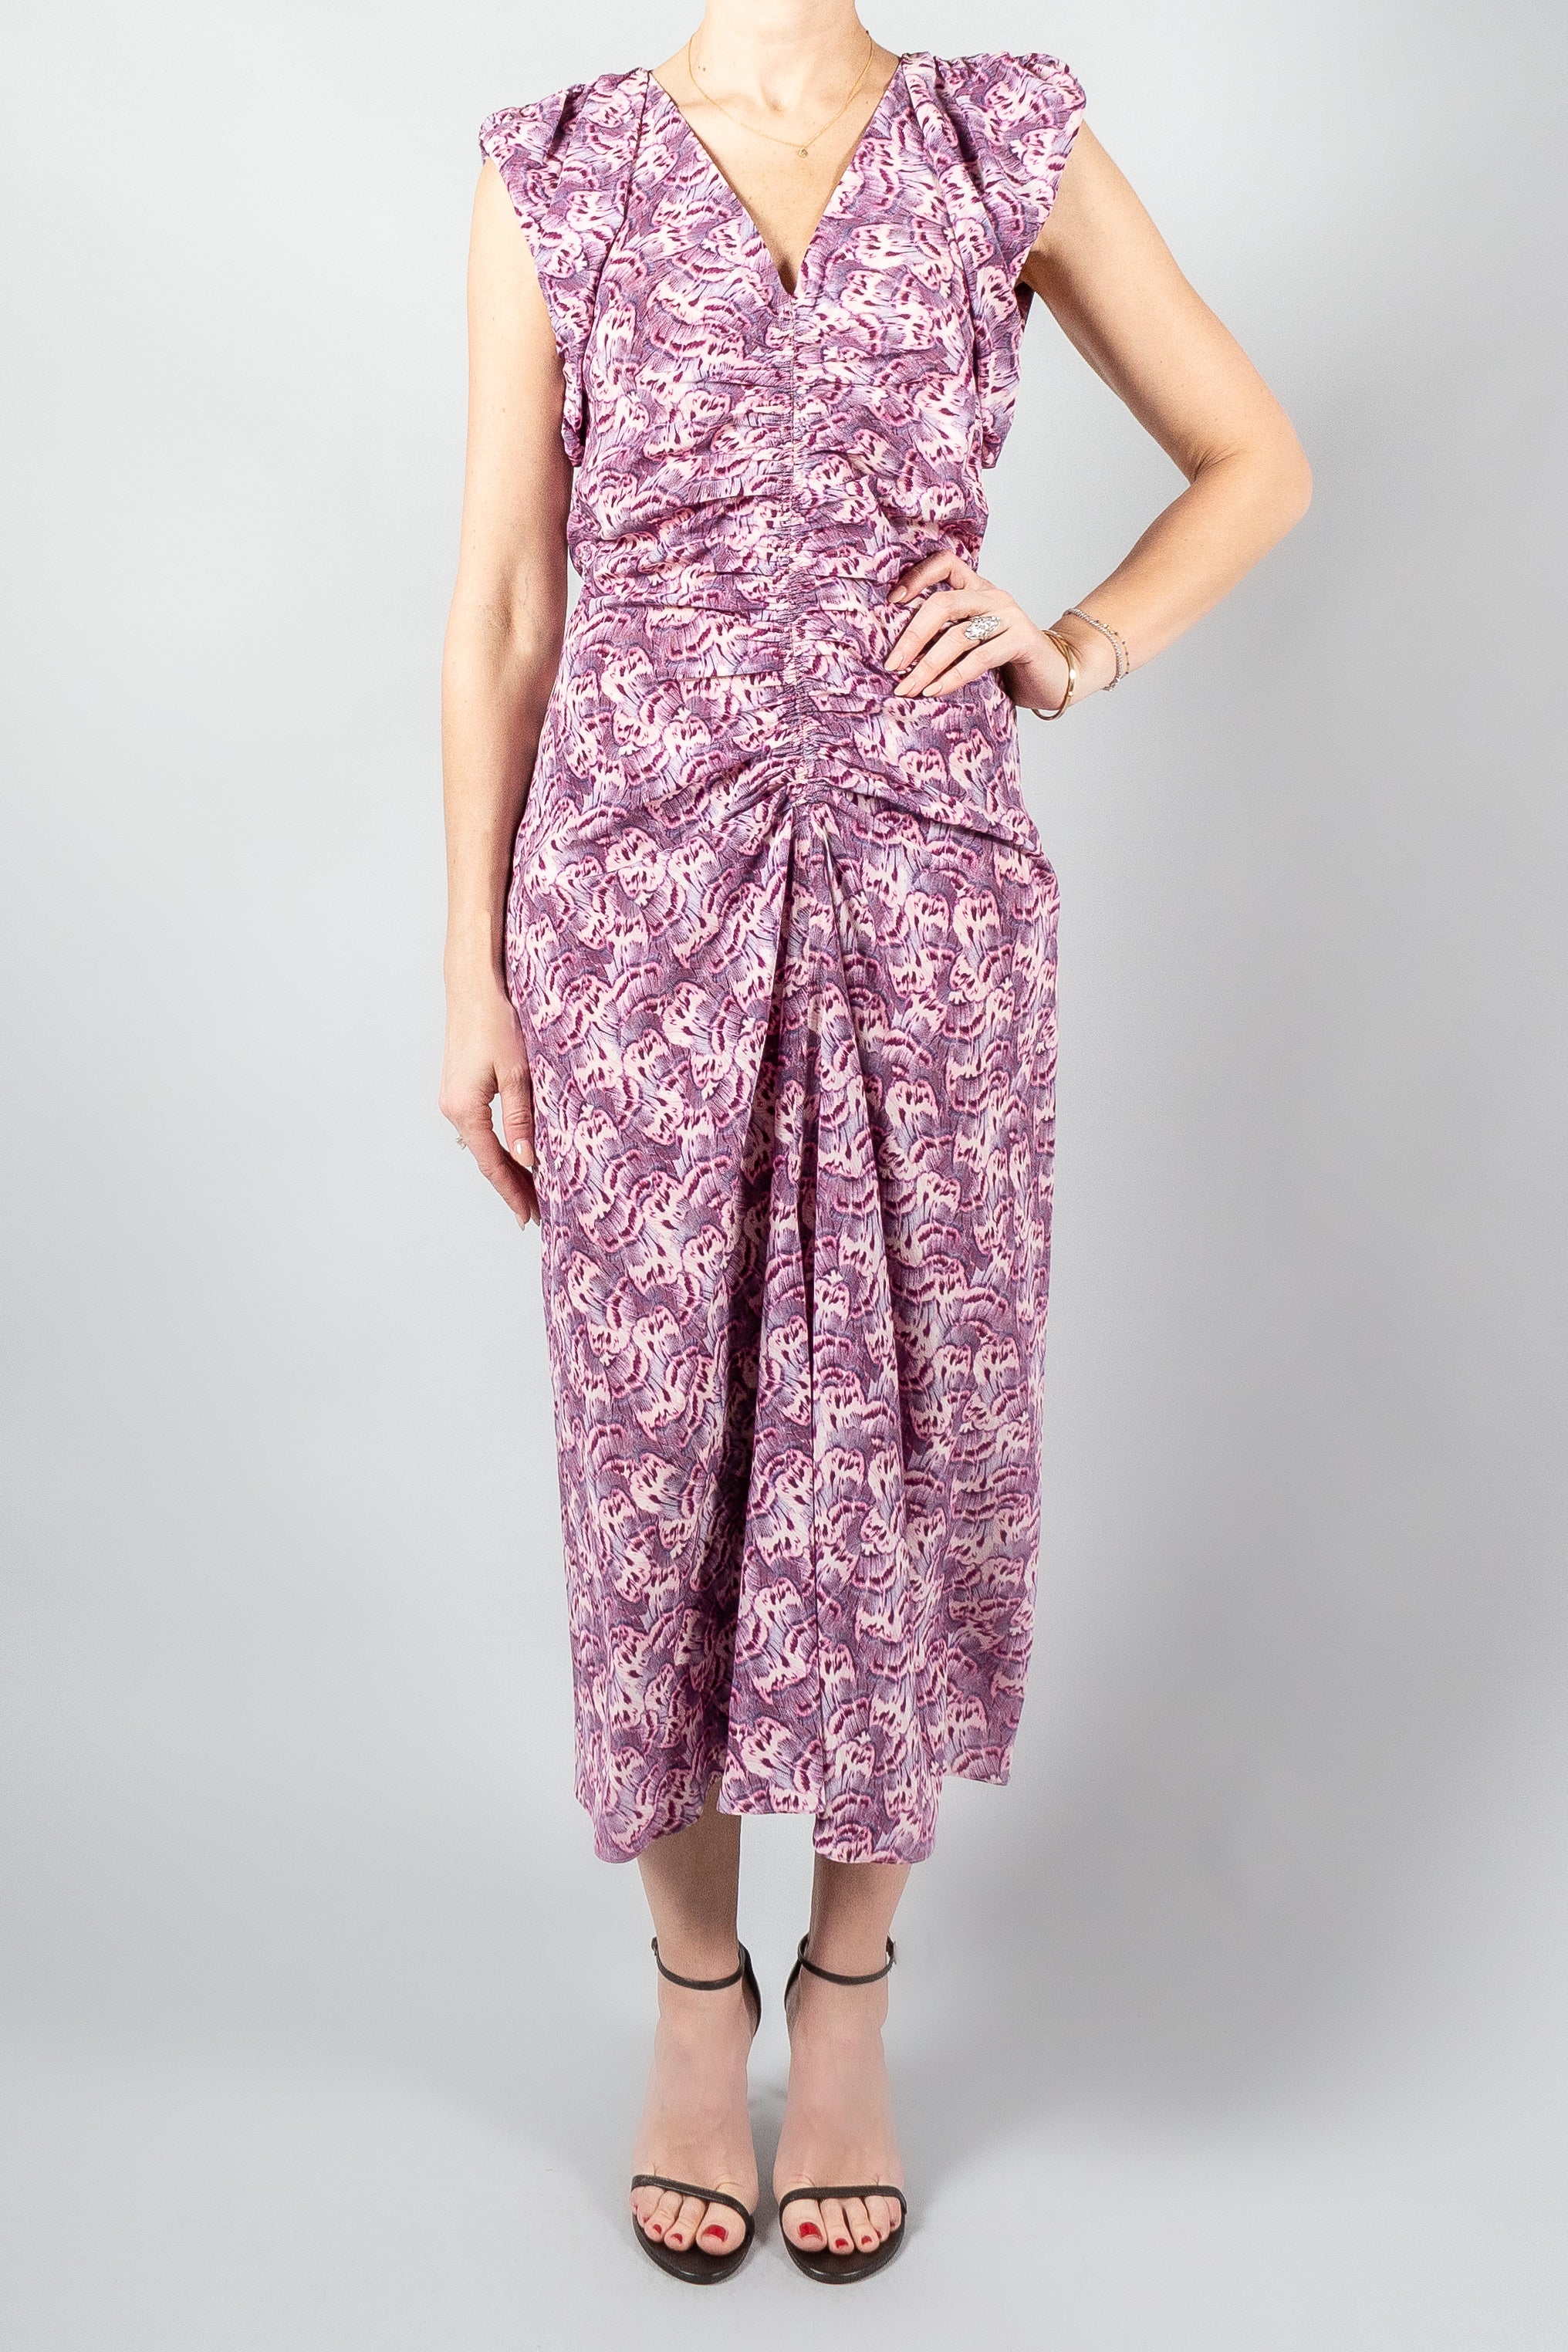 Isabel Marant Gilya Dress-Dresses and Jumpsuits-Misch-Boutique-Vancouver-Canada-misch.ca